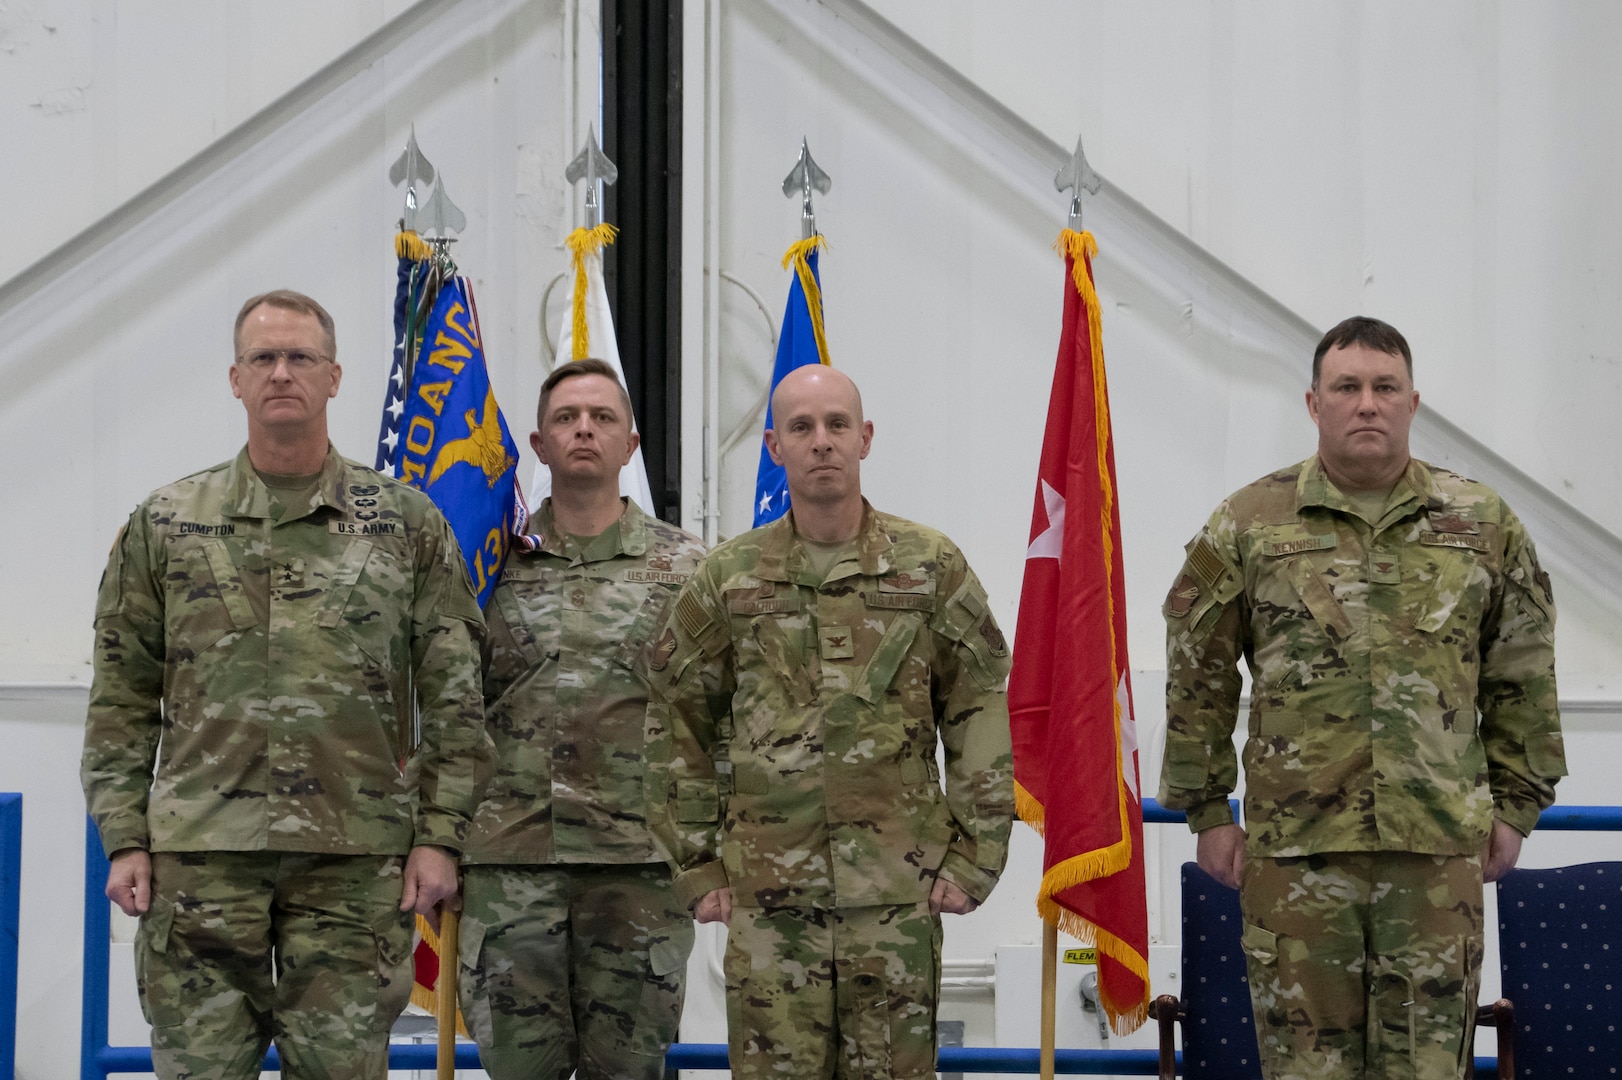 From left, Maj. Gen. Levon Cumpton, Adjutant General of the Missouri National Guard, Chief Master Sgt. Jason R. Henke, 131st Bomb Wing command chief master sergeant, Col. Matthew D. Calhoun, outgoing 131st Bomb Wing commander, and Col. Jared P. Kennish, incoming 131st Bomb Wing commander, stand ready for the passing of the guidon during a change of command ceremony at Whiteman Air Force Base, Missouri, Feb. 3, 2023. During the ceremony Col. Jared P. Kennish assumed command of the 131st Bomb Wing from Col. Matthew D. Calhoun. (U.S. Air National Guard photo by Senior Airman Kelly C. Ferguson)